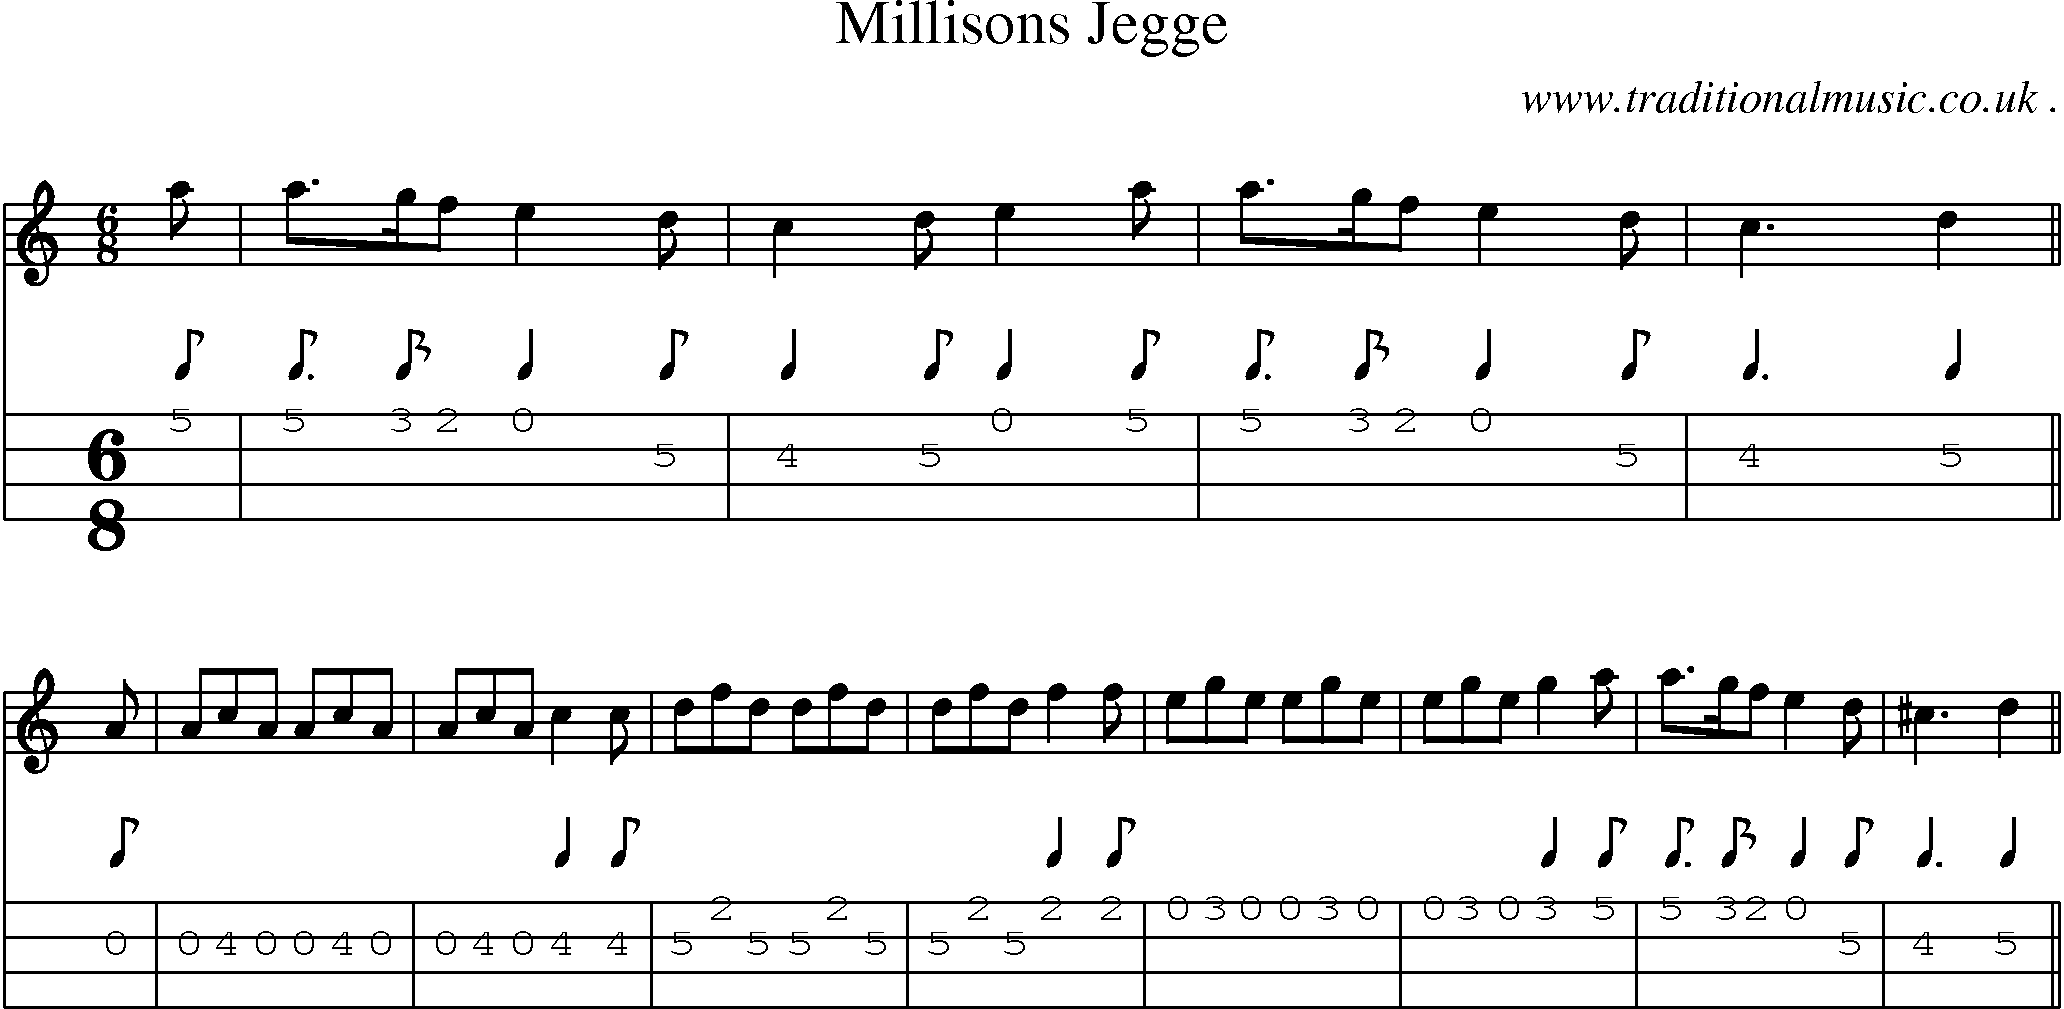 Sheet-Music and Mandolin Tabs for Millisons Jegge